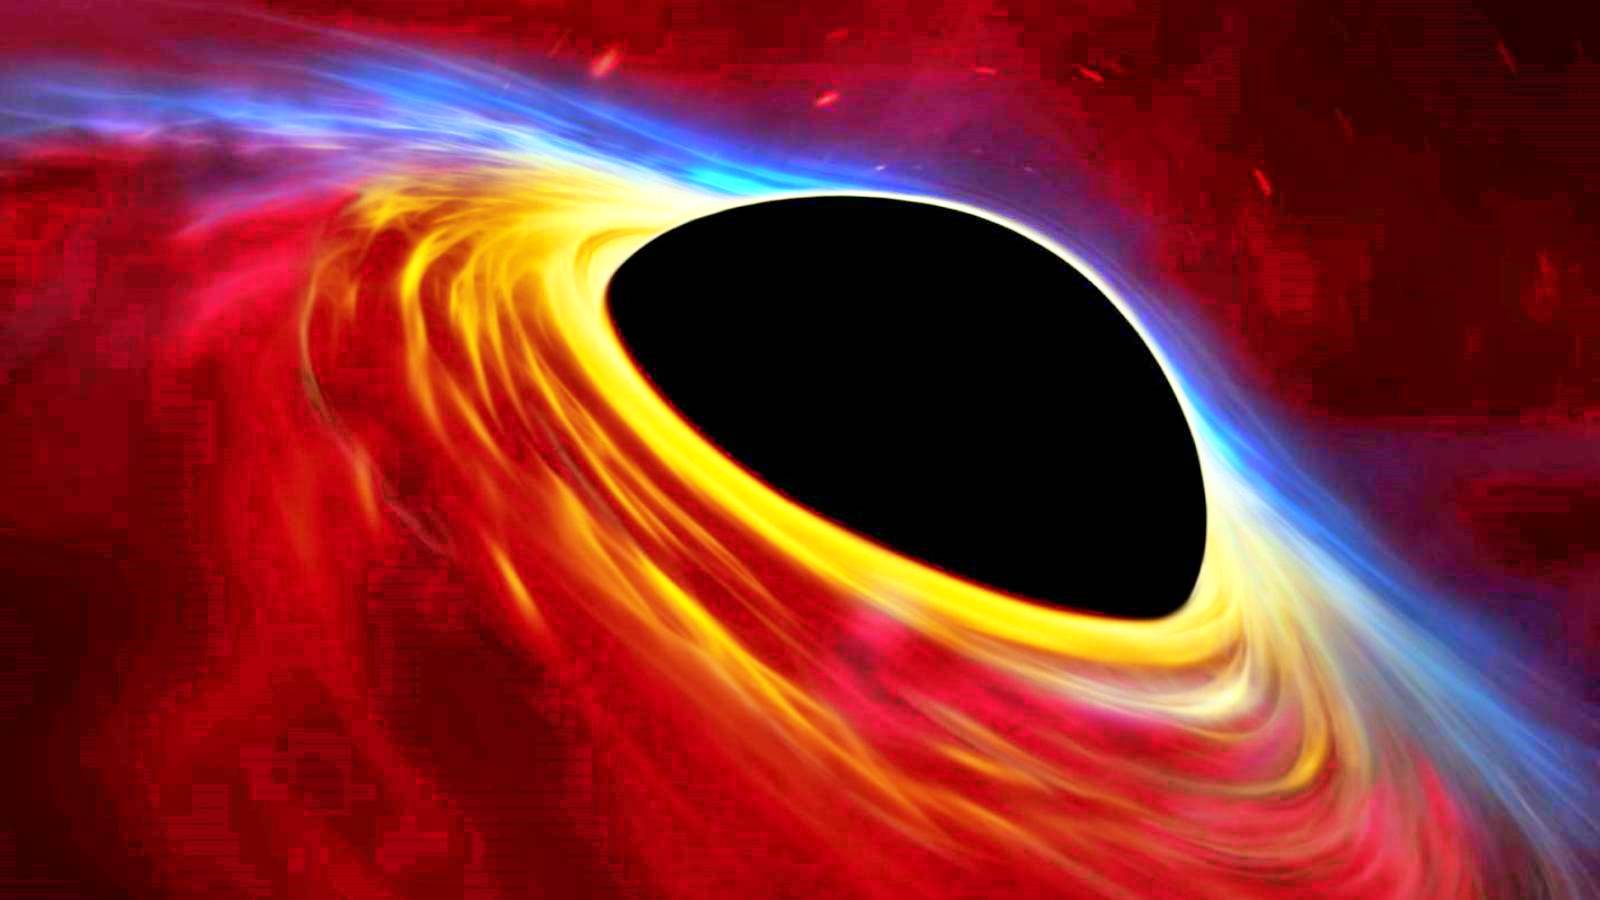 INCREDIBLE Black Hole Impressed People Science Reveals Secret to the Universe